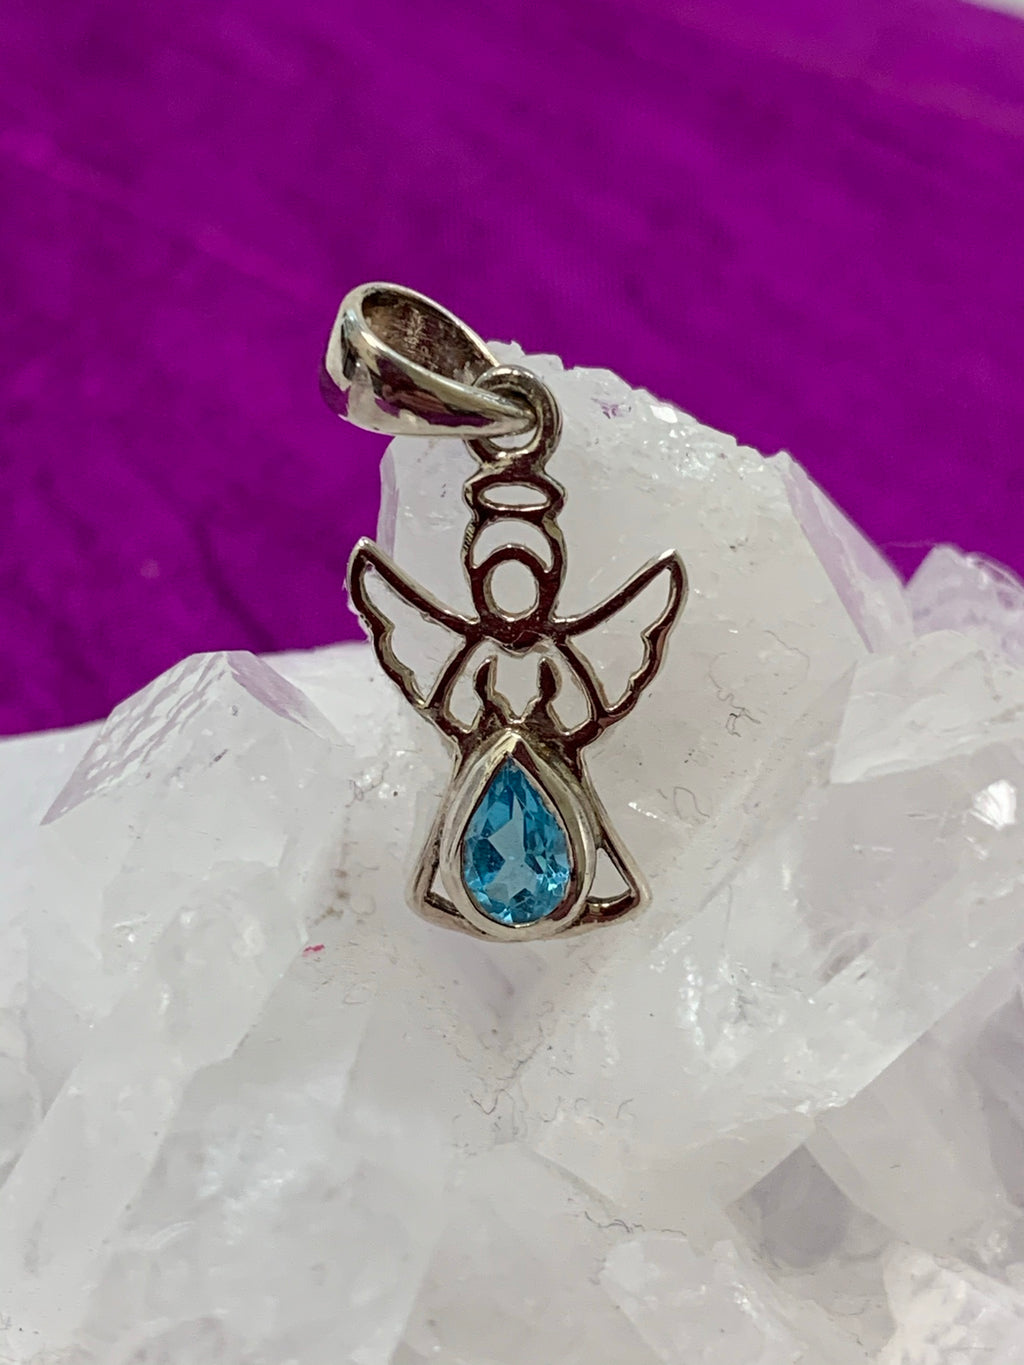 Dainty sterling silver angel pendant with stunning teardrop blue topaz. Blue topaz soothes & relaxes, is a stone of love and manifestation, verbal communication, emotional support and more. The angel reminds us that we are being watched over, always! Pendant is approximately 1" long. Cost is $18.00.